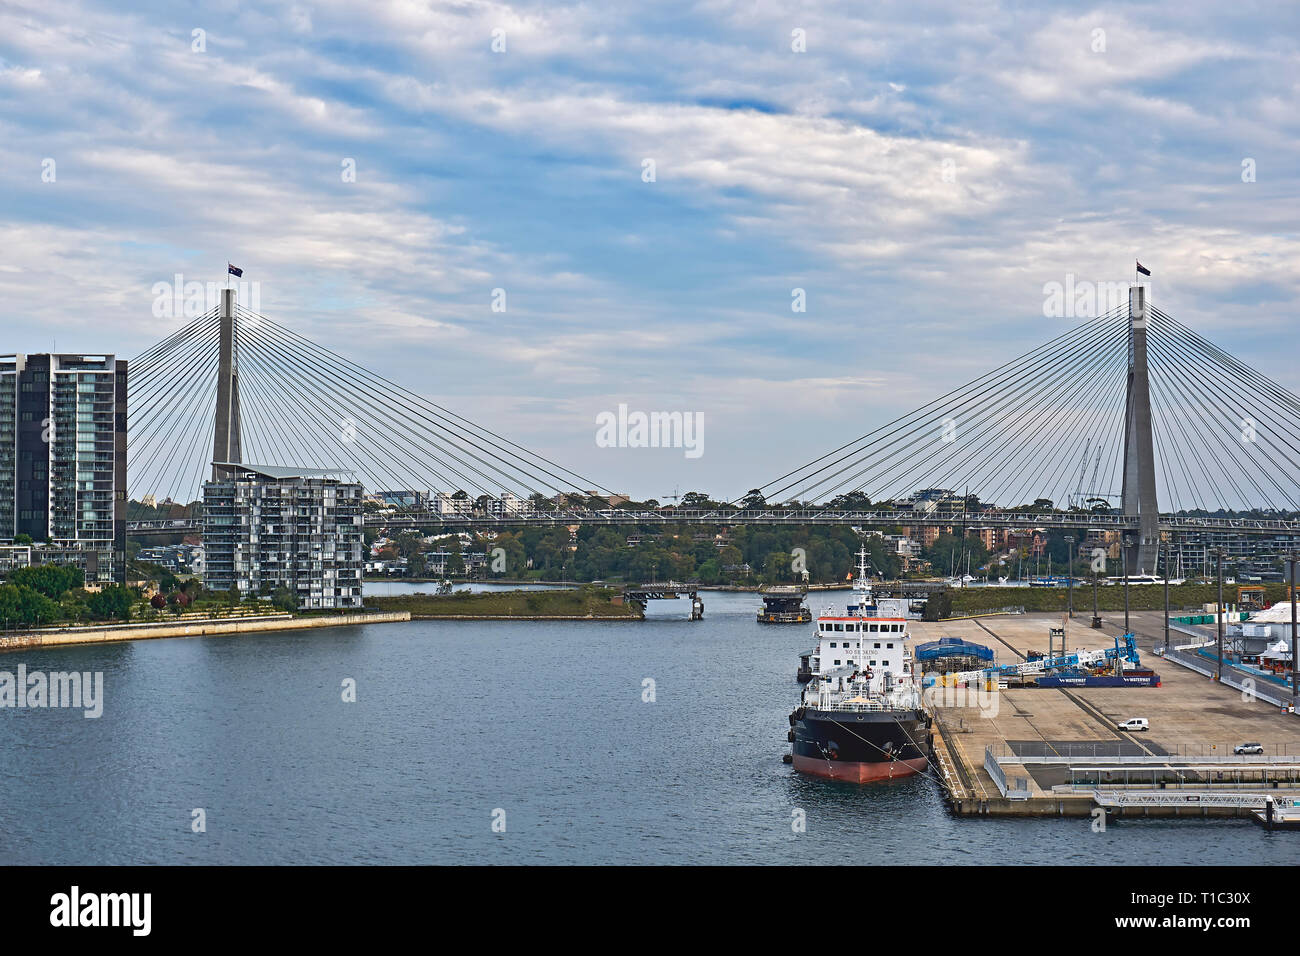 The Anzac Bridge is an 8-lane cable-stayed bridge spanning Johnstons Bay between Pyrmont and Glebe Island (part of the suburb of Rozelle), close to th Stock Photo